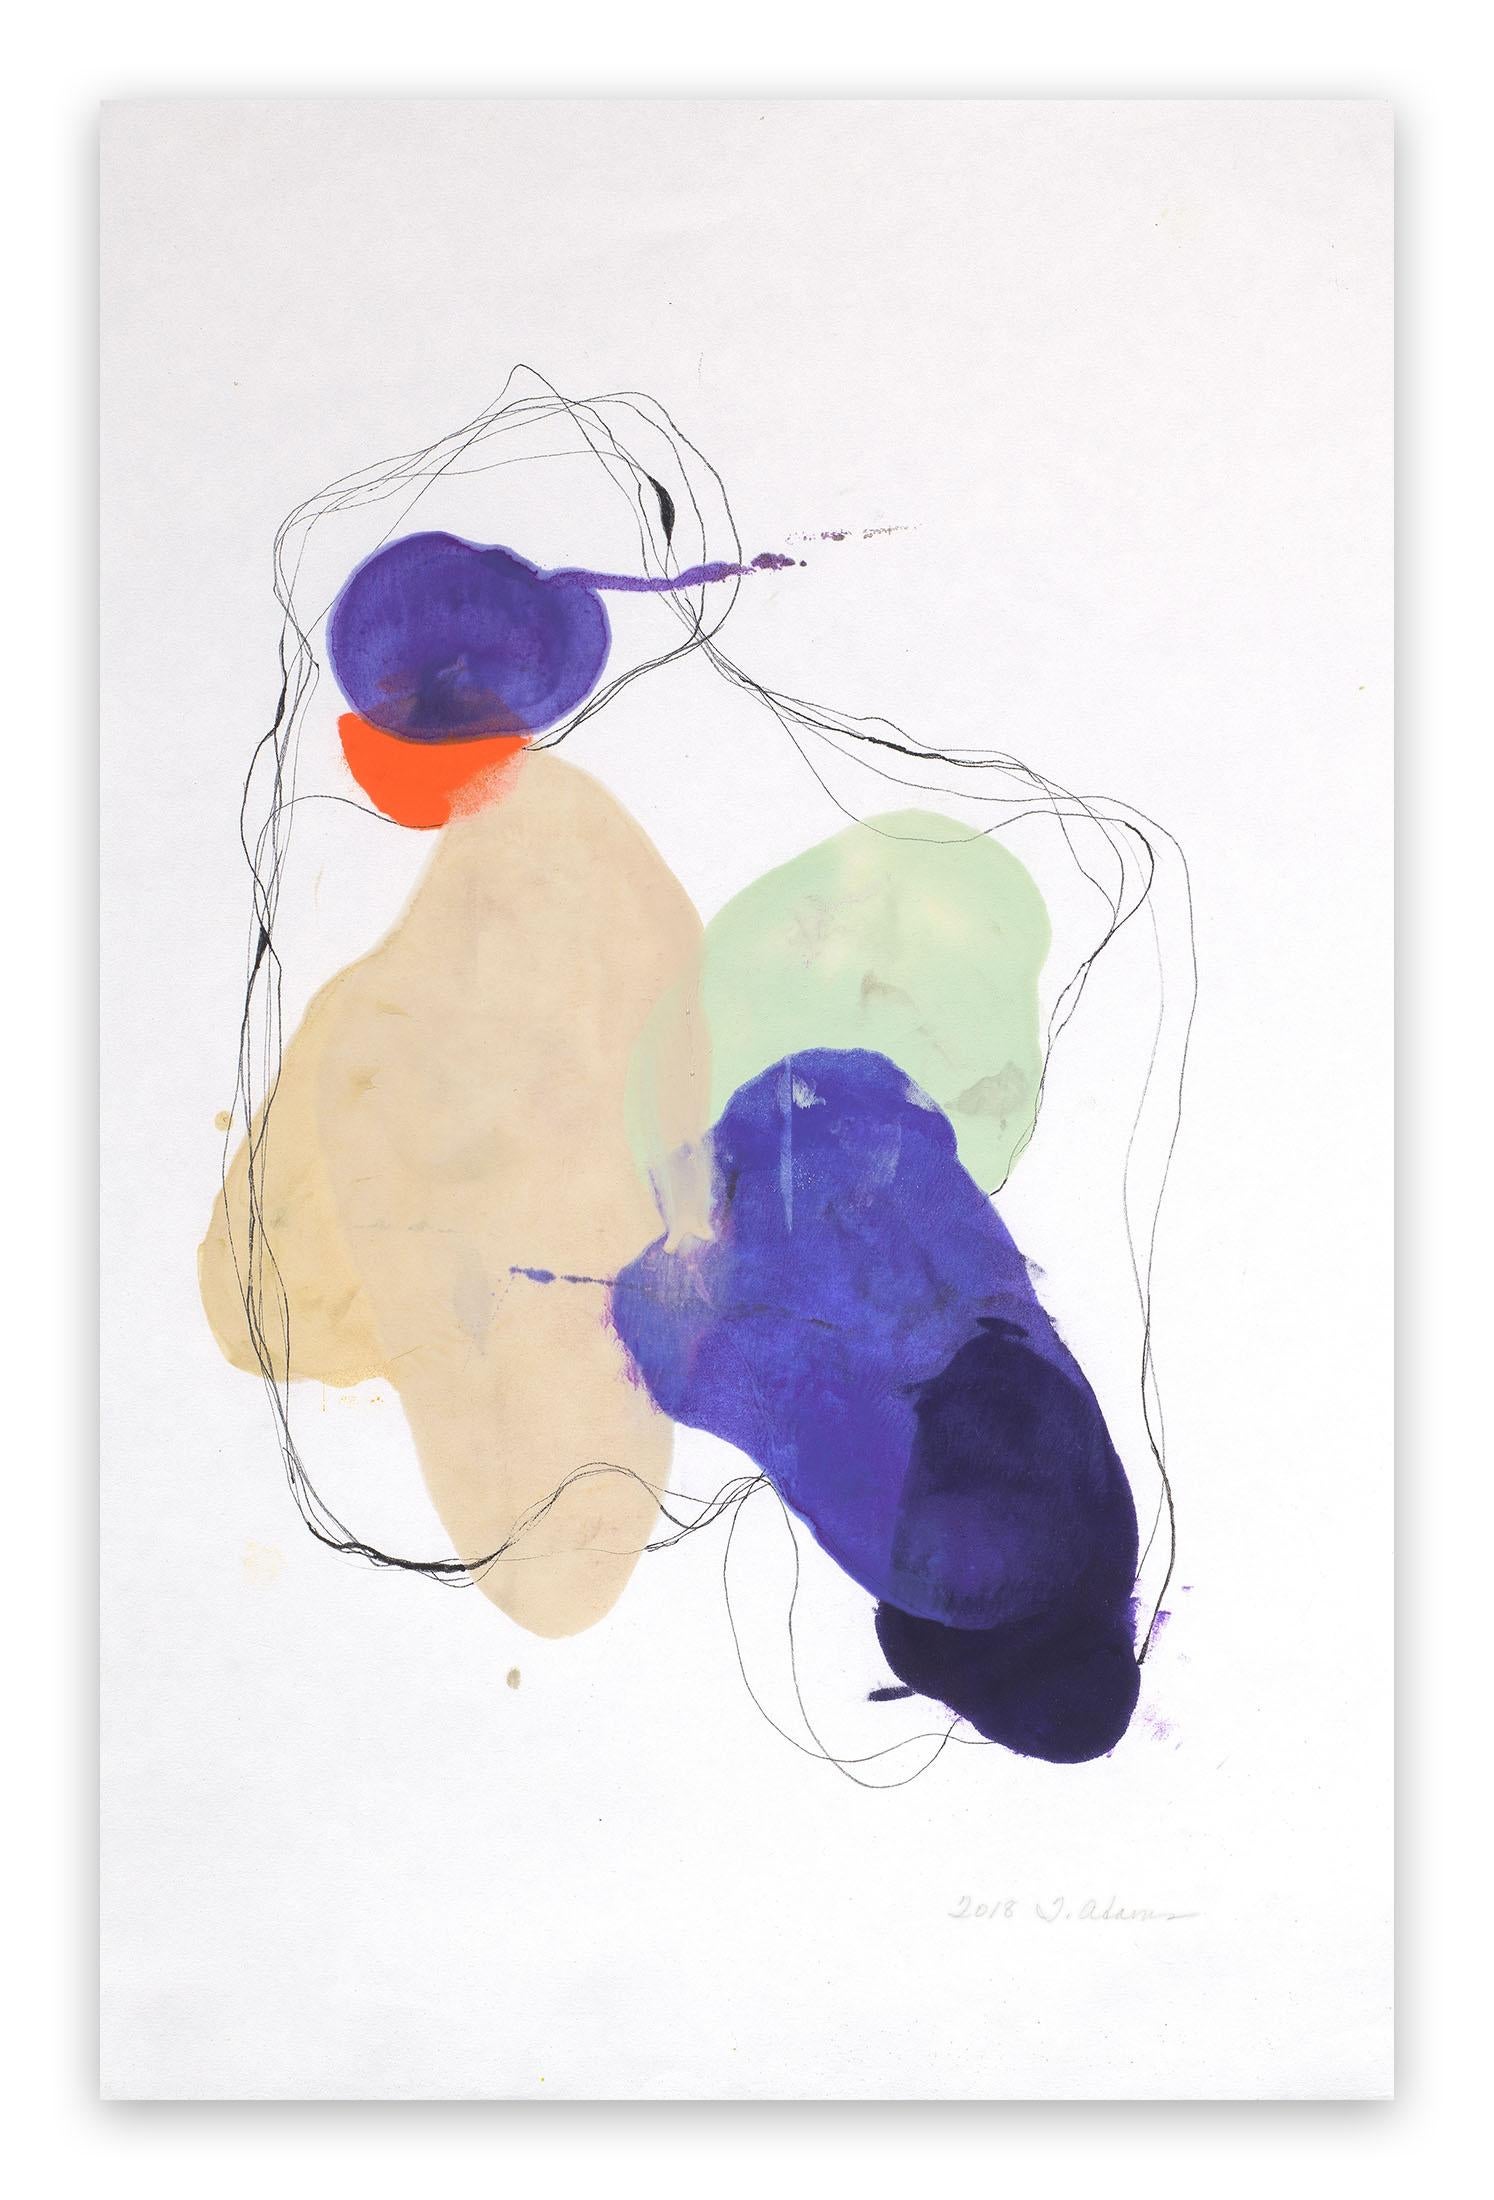 Tracey Adams Abstract Painting – 0118.2 (Abstraktes Gemälde)